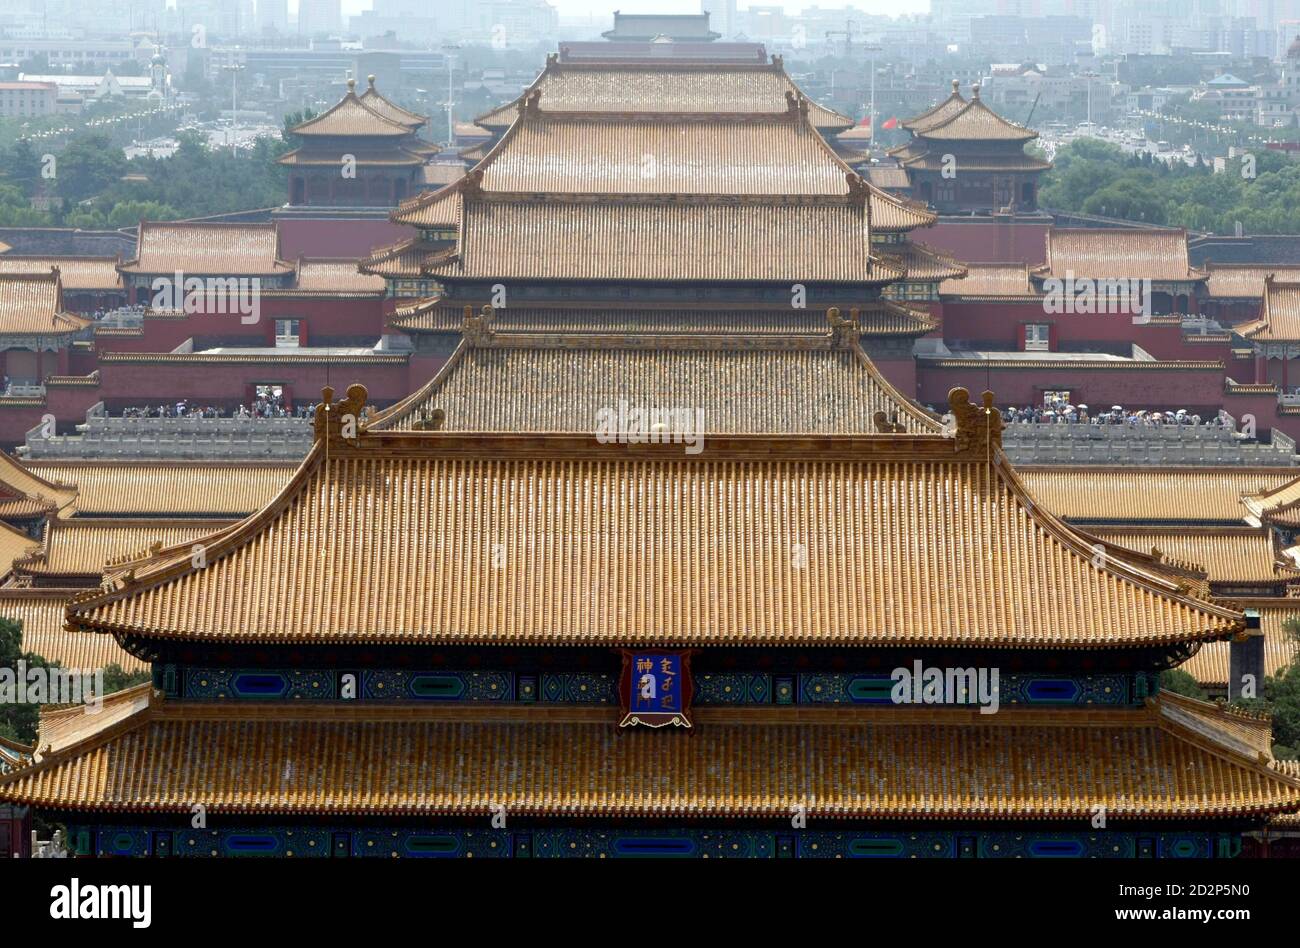 The Forbidden City in Beijing is seen on a day with cleaner air conditions July 15, 2008. With less than a month to go to the Olympics, Beijing and neighbouring provinces have asked polluting industries to shut or reduce production to clean the air for athletes, and to help offset a looming power shortage. REUTERS/Jason Lee (CHINA) (BEIJING OLYMPICS 2008 PREVIEW) Stock Photo